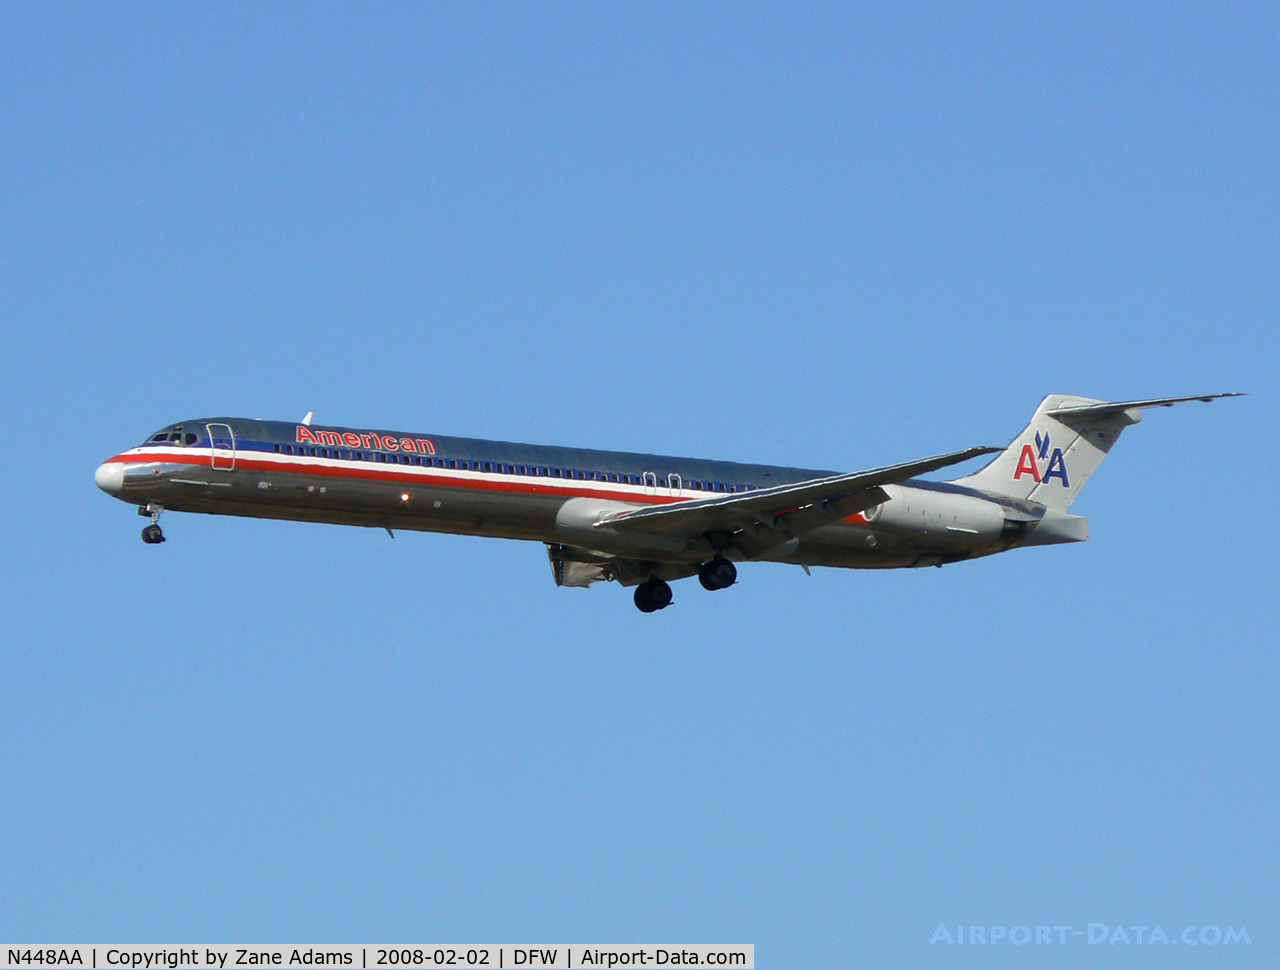 N448AA, 1987 McDonnell Douglas MD-82 (DC-9-82) C/N 49474, American Airlines at DFW